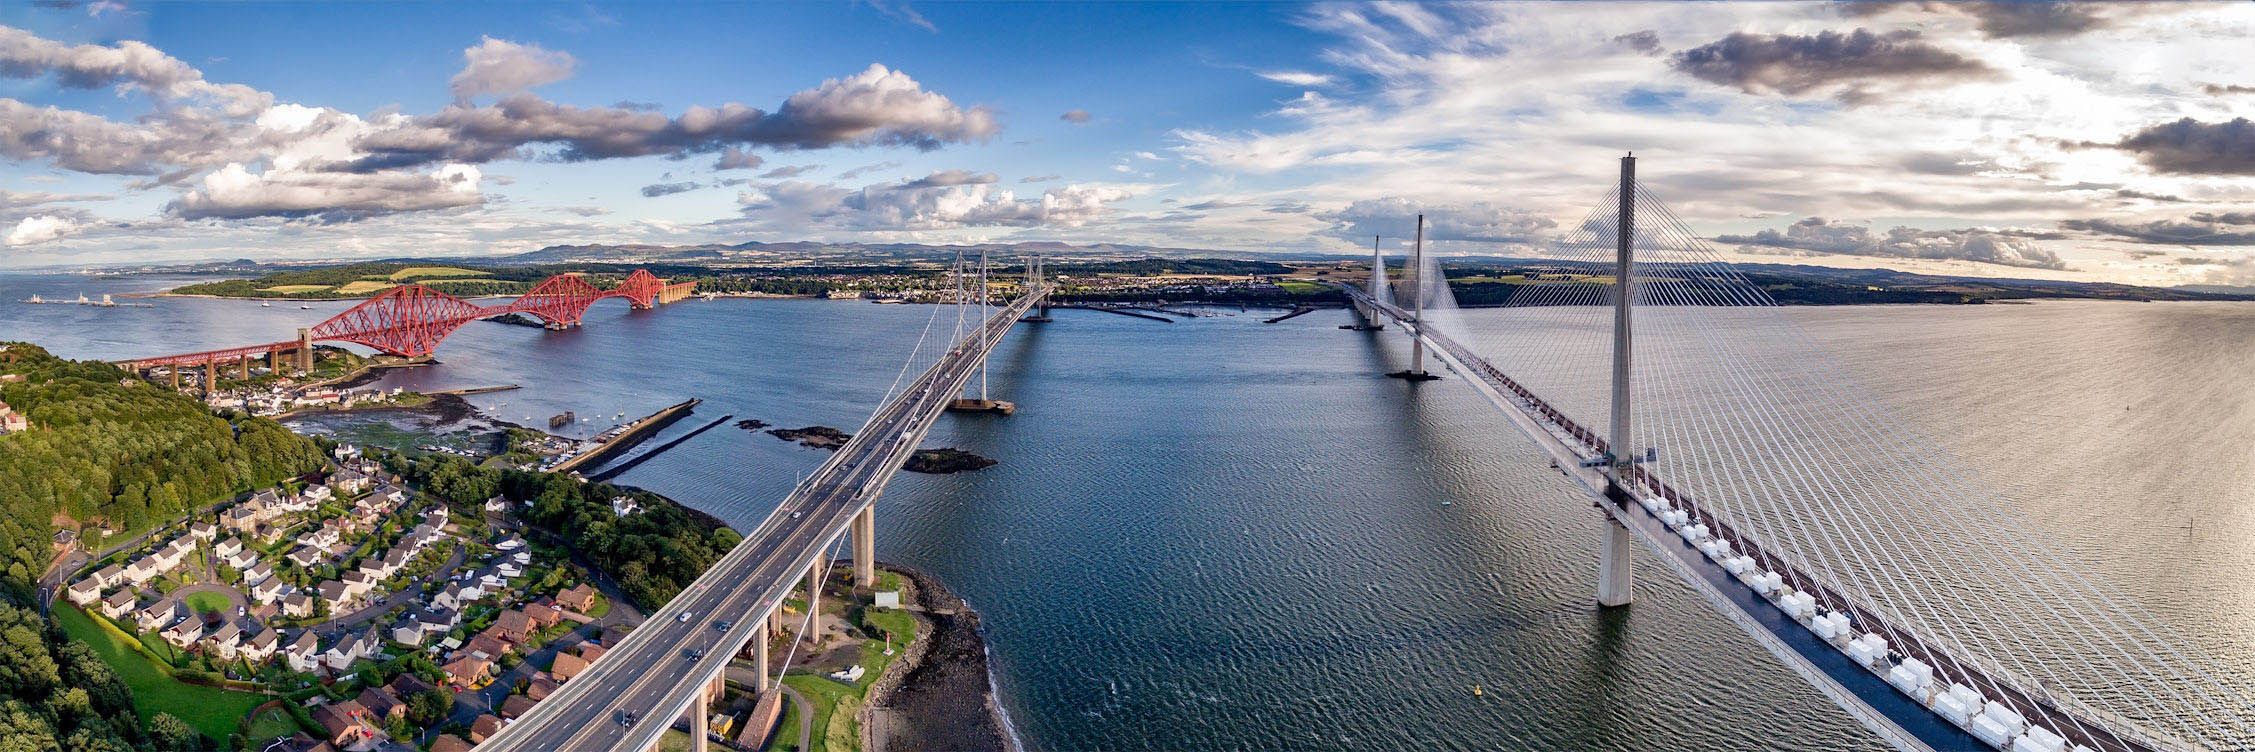 The historic Forth Bridge, with its distinctive red hue, stands proudly alongside its modern counterparts, the Forth Road Bridge and the Queensferry Crossing.